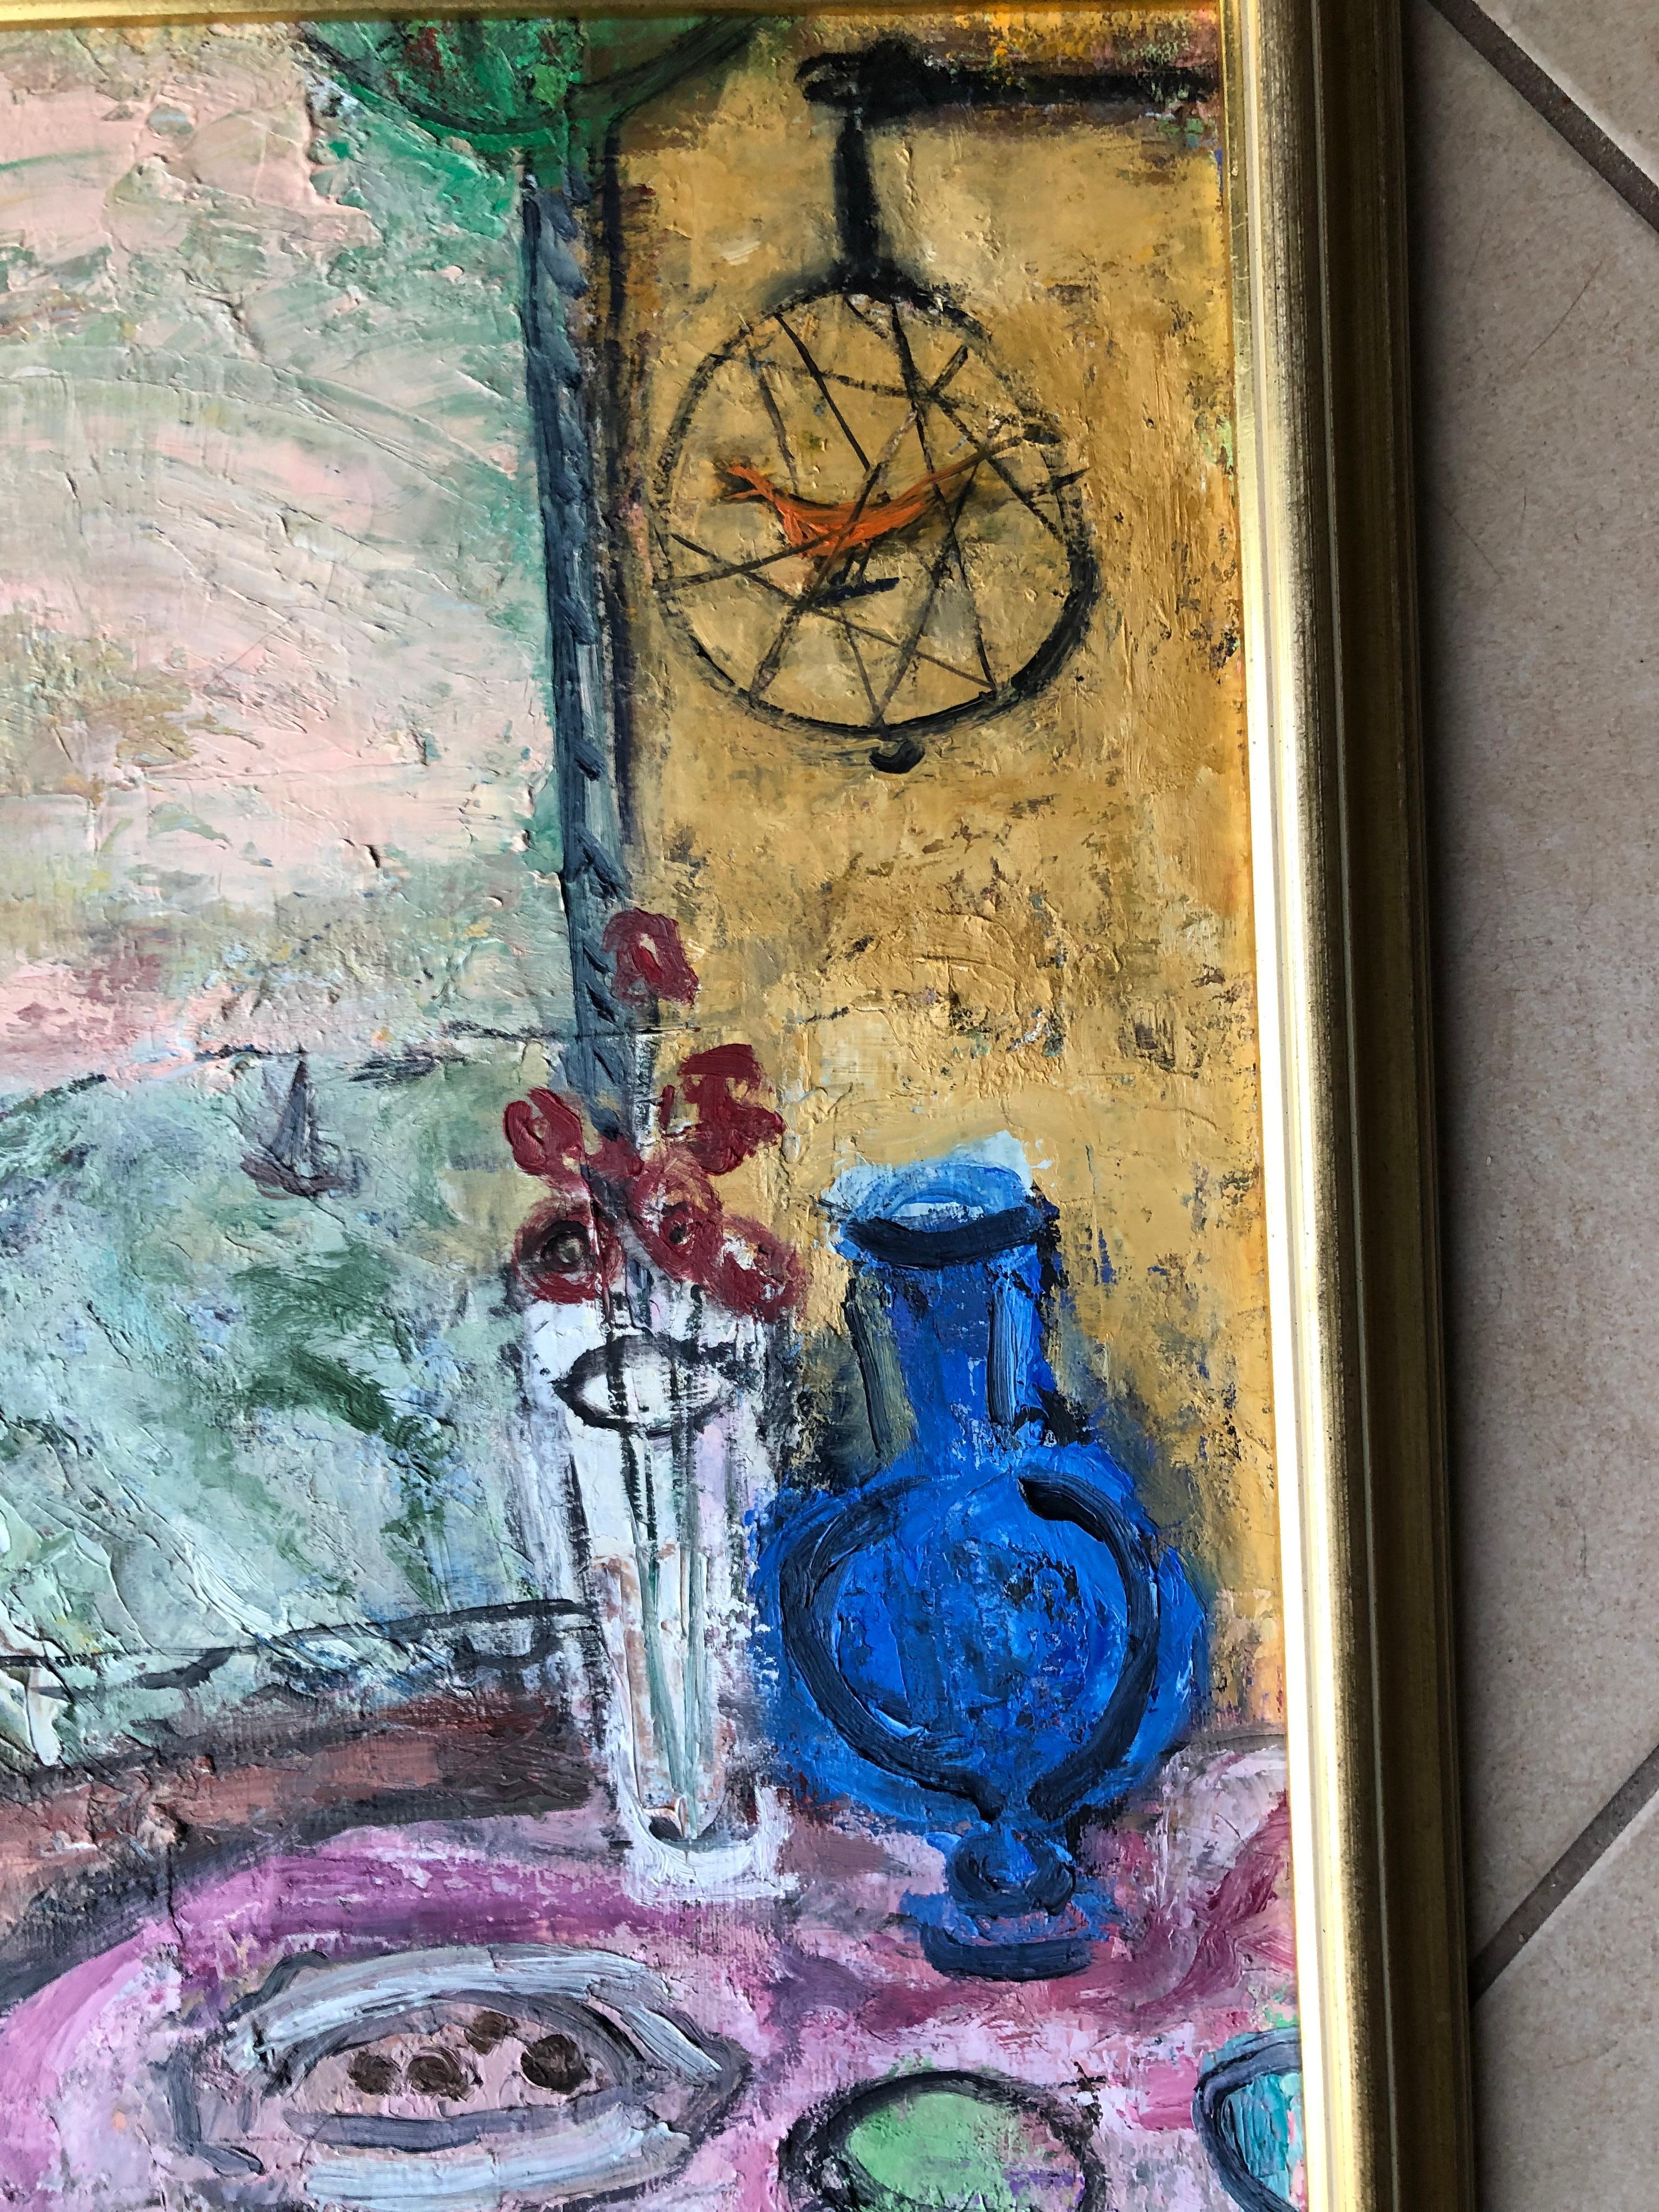 Fabulous painting that reminds me of ones by Raoul Dufy. Harriette Trifon studied art at Pratt and the Art Students League. Painting is oil on canvas measuring 24 inches high by 18 wide and is in excellent original condition. The frame measures 27